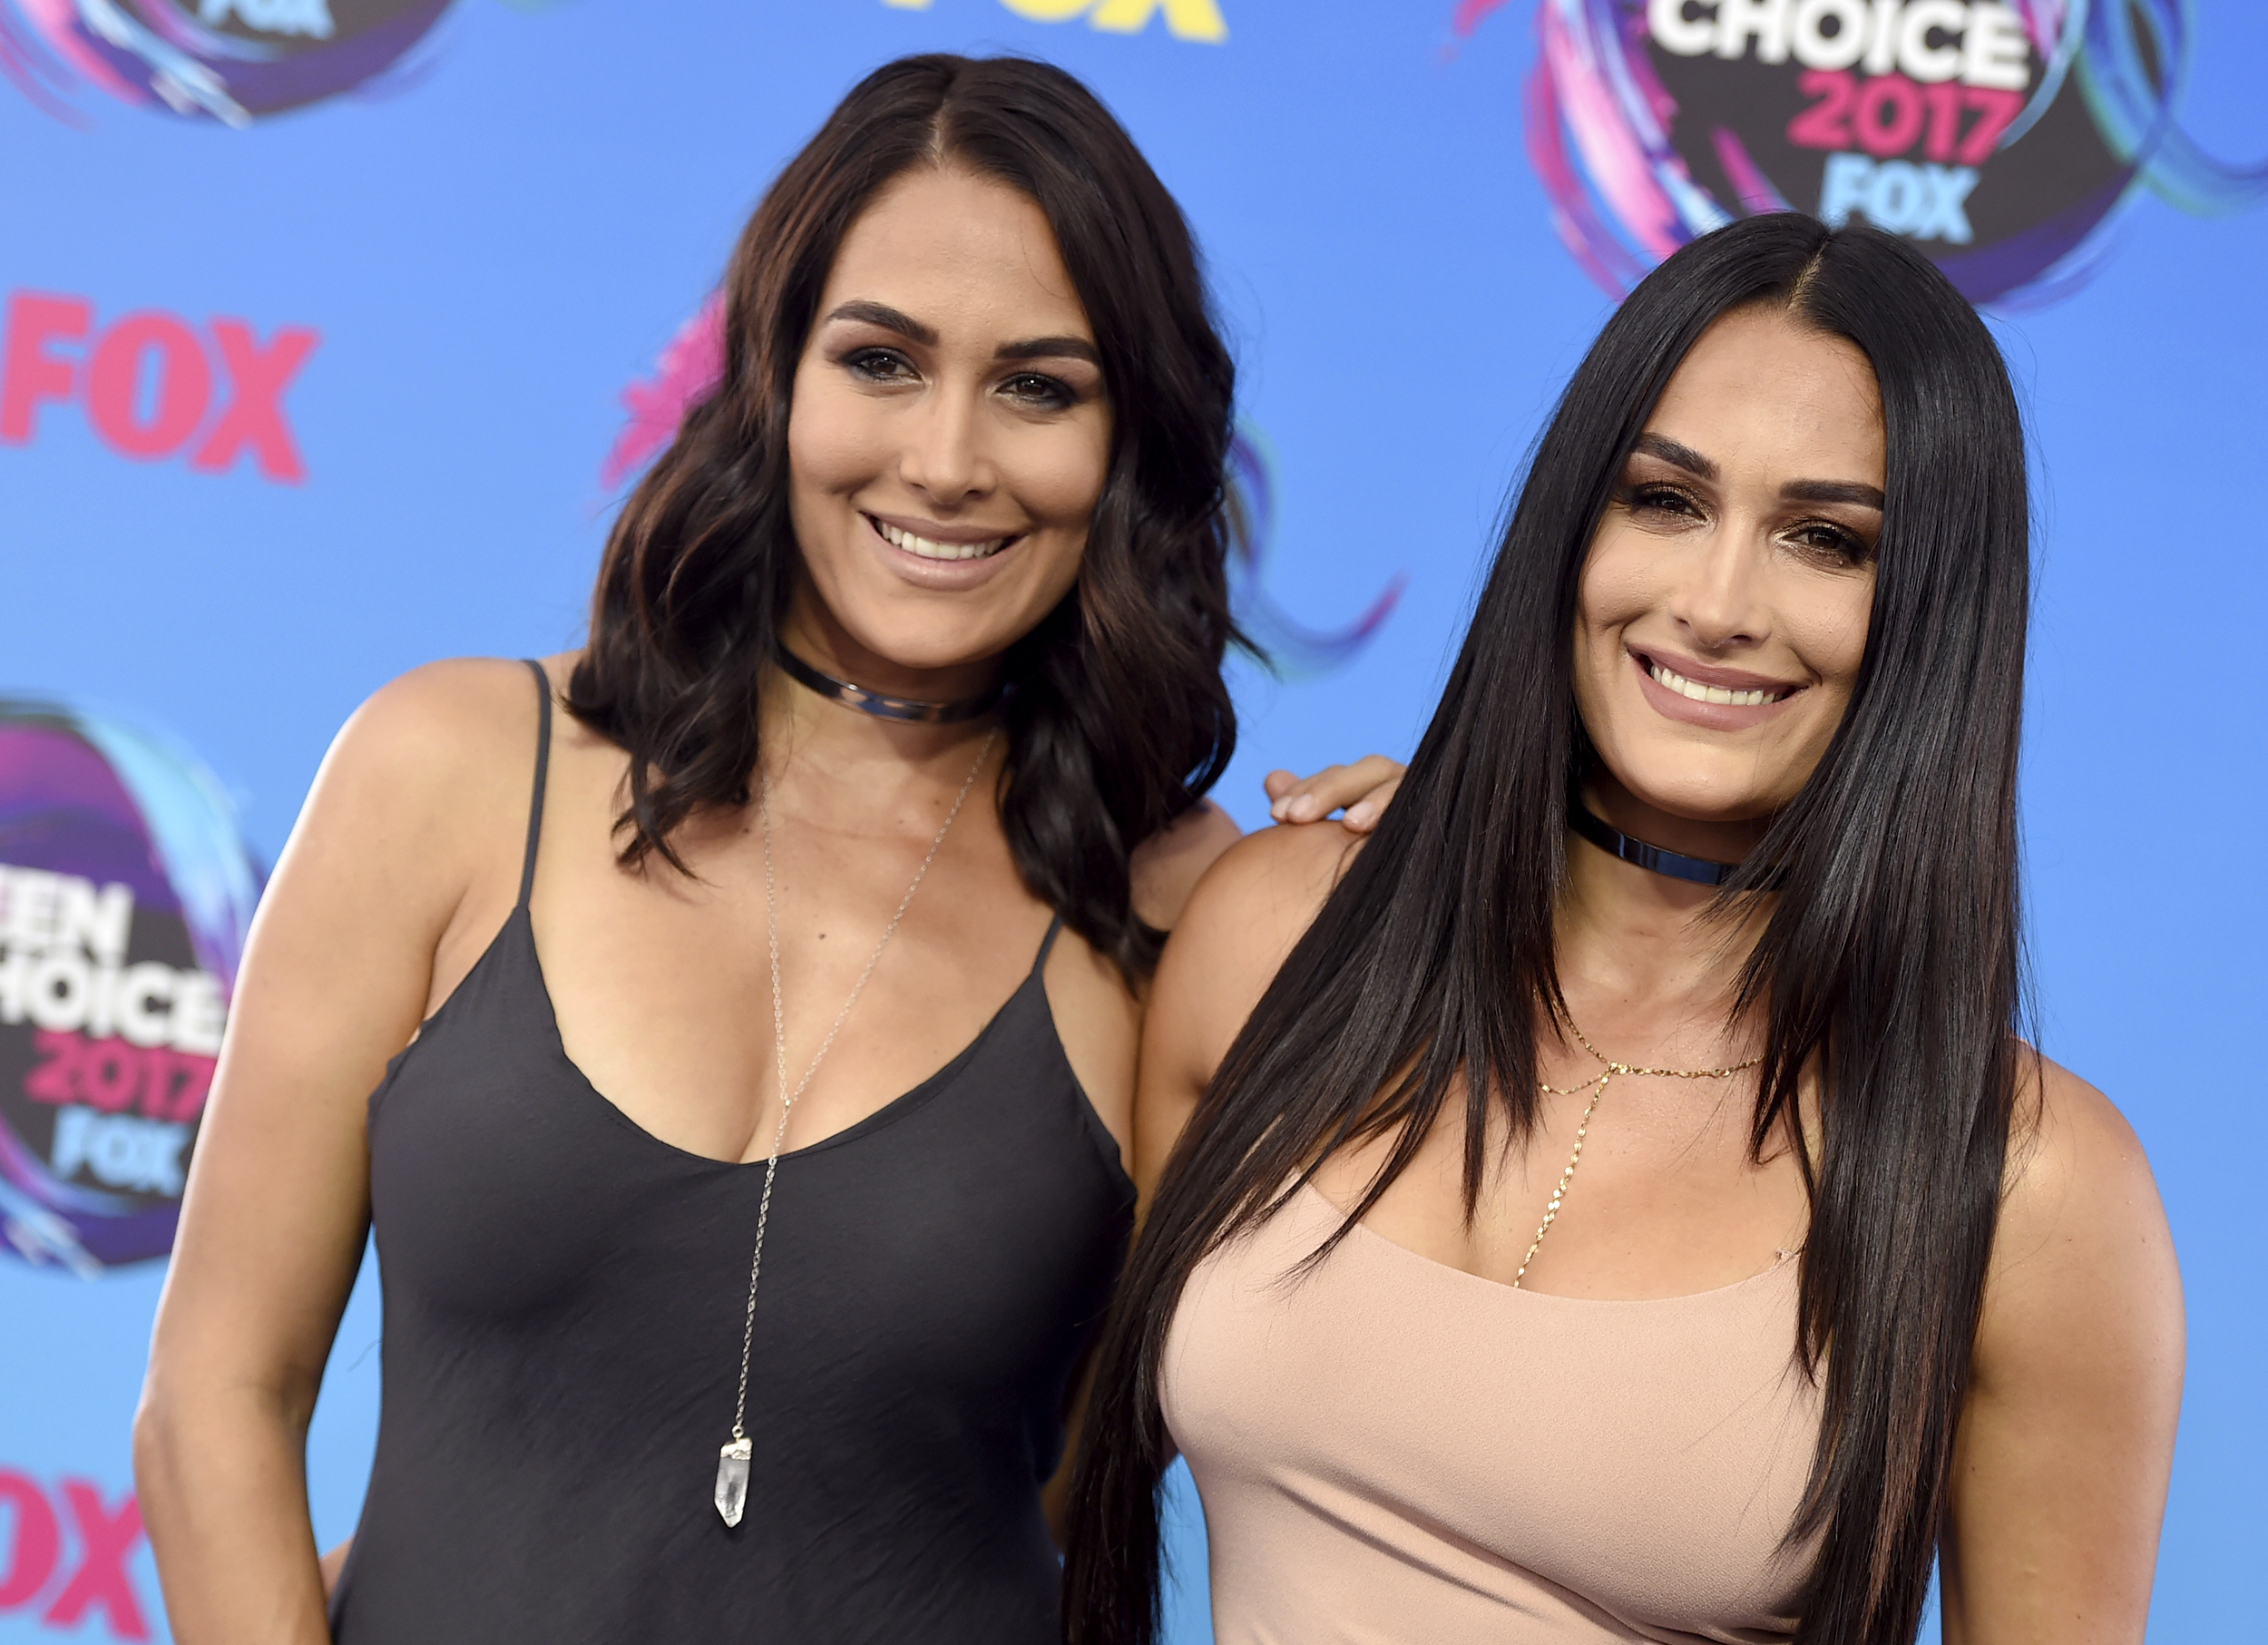 The Bella Twins worked at Hooters